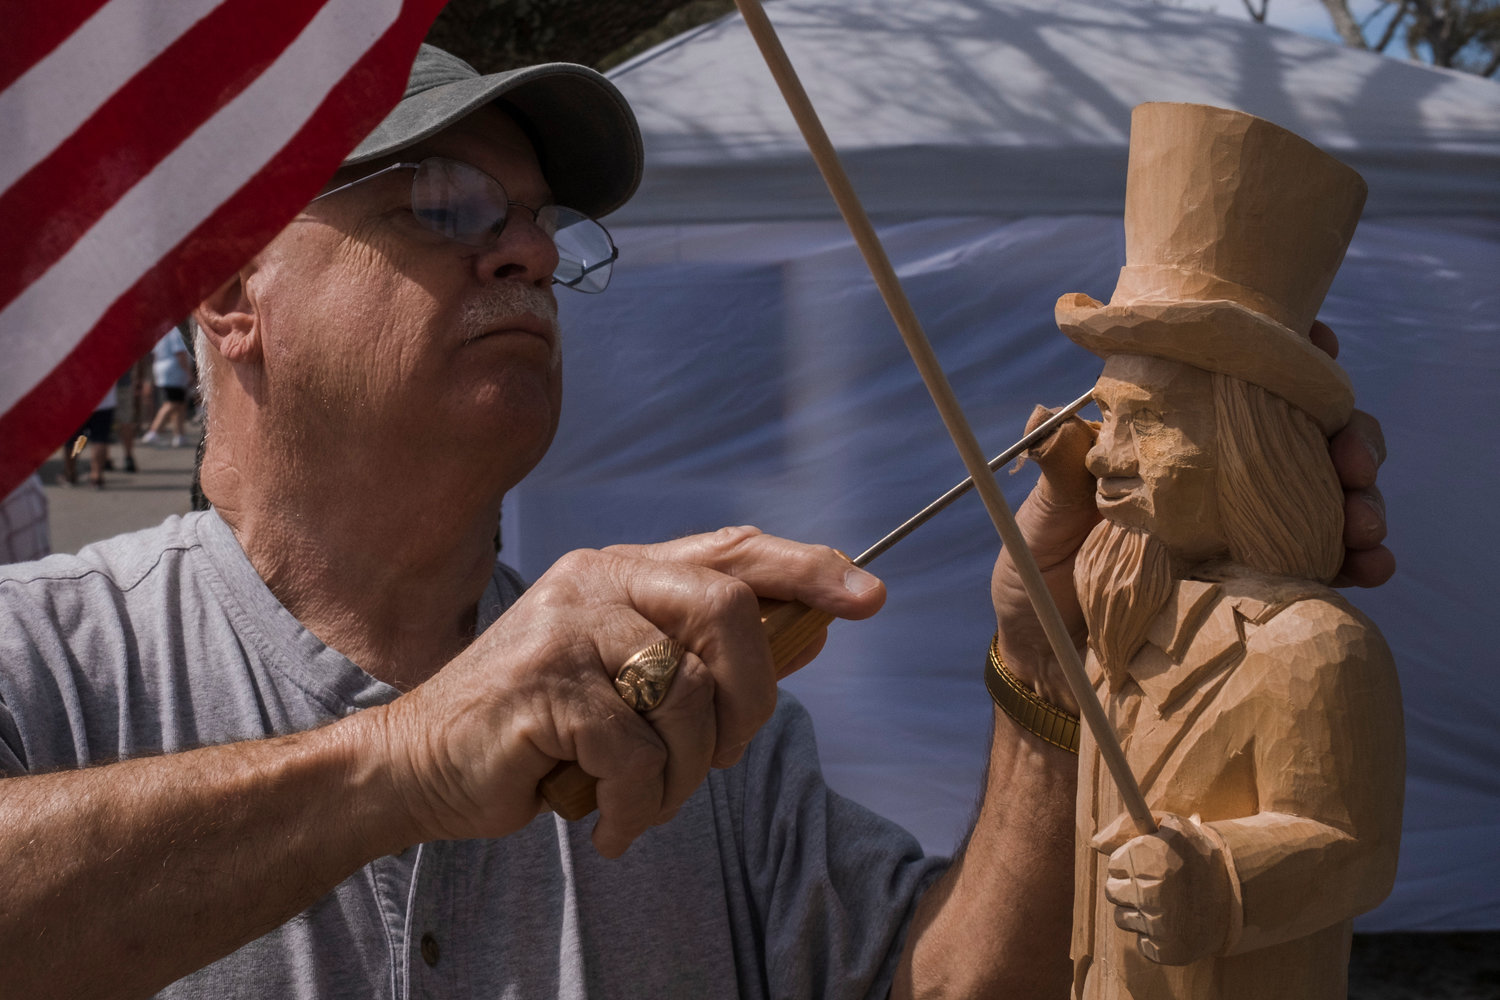 MICAH GREEN / GULF COAST MEDIA

Chip Smith, of Fairhope, works on a wood carving during Ballyhoo Festival at Gulf State Park on Saturday.